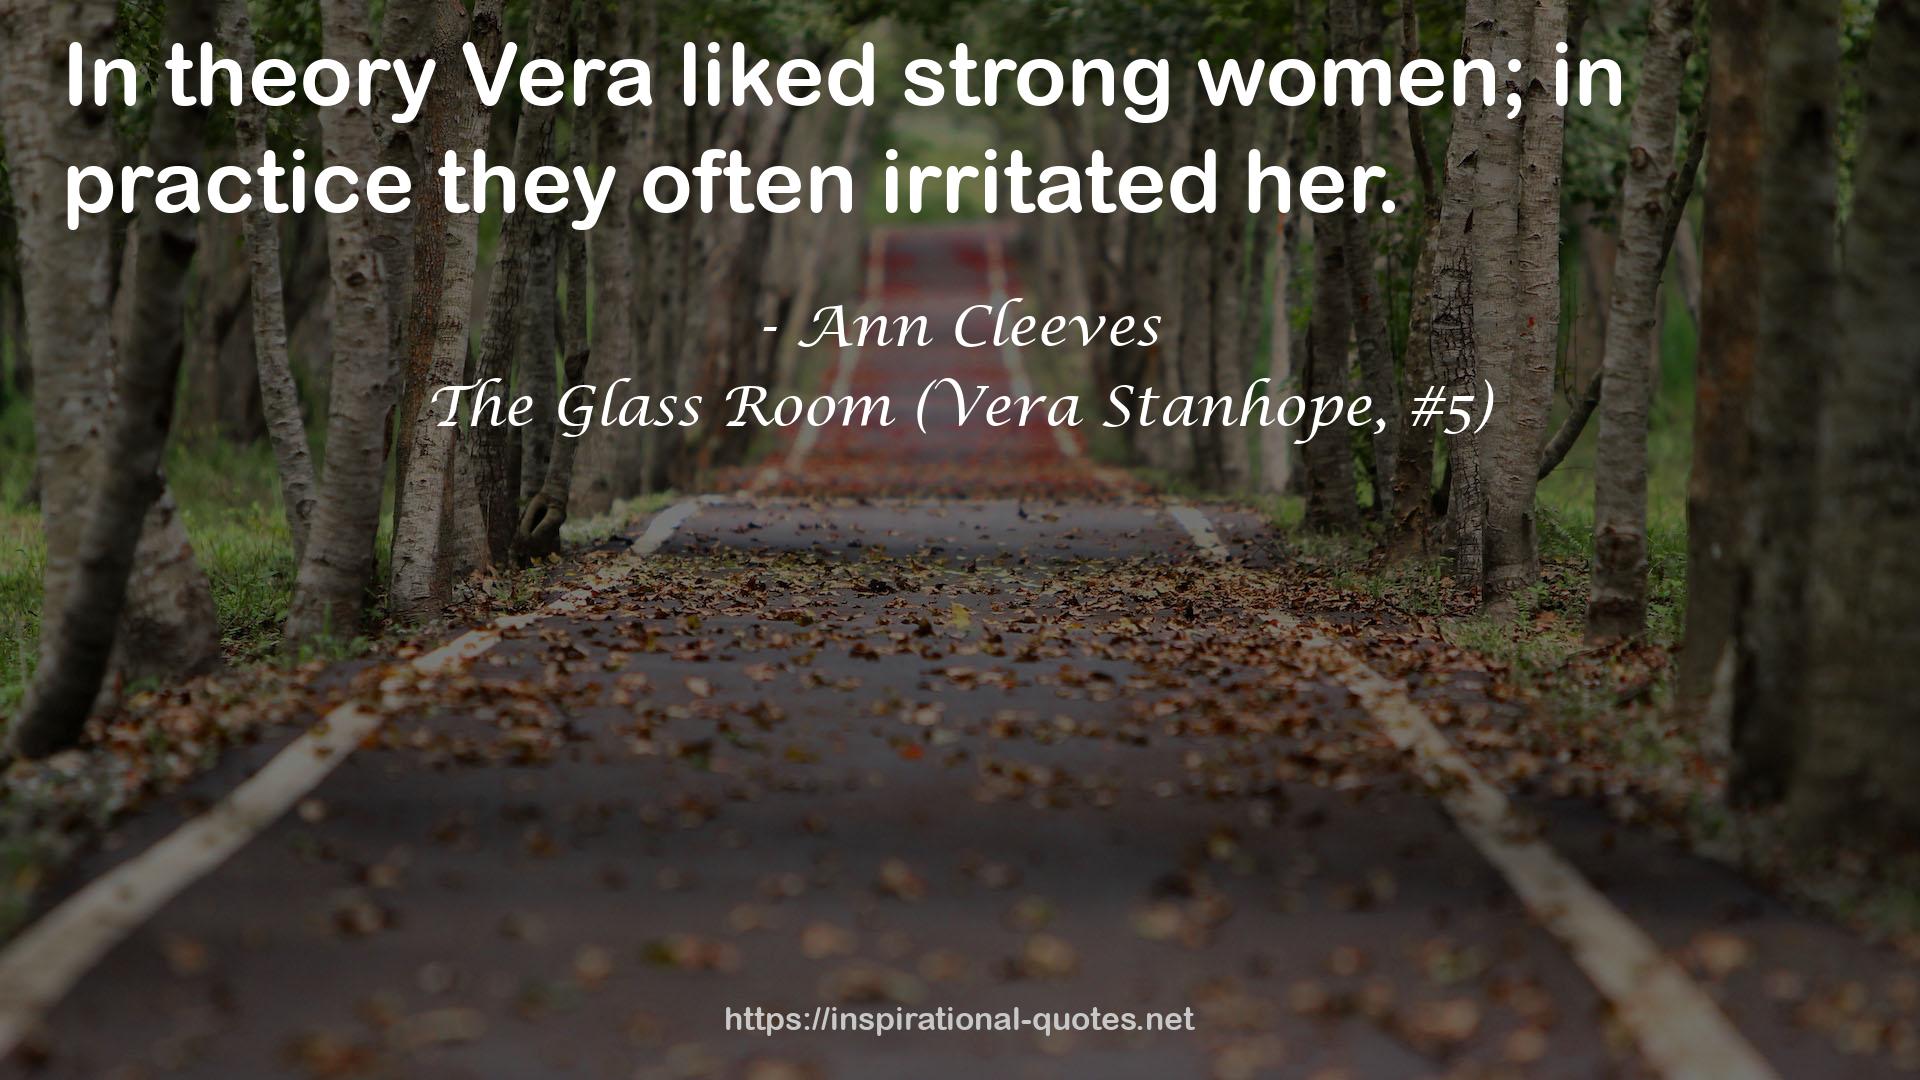 The Glass Room (Vera Stanhope, #5) QUOTES